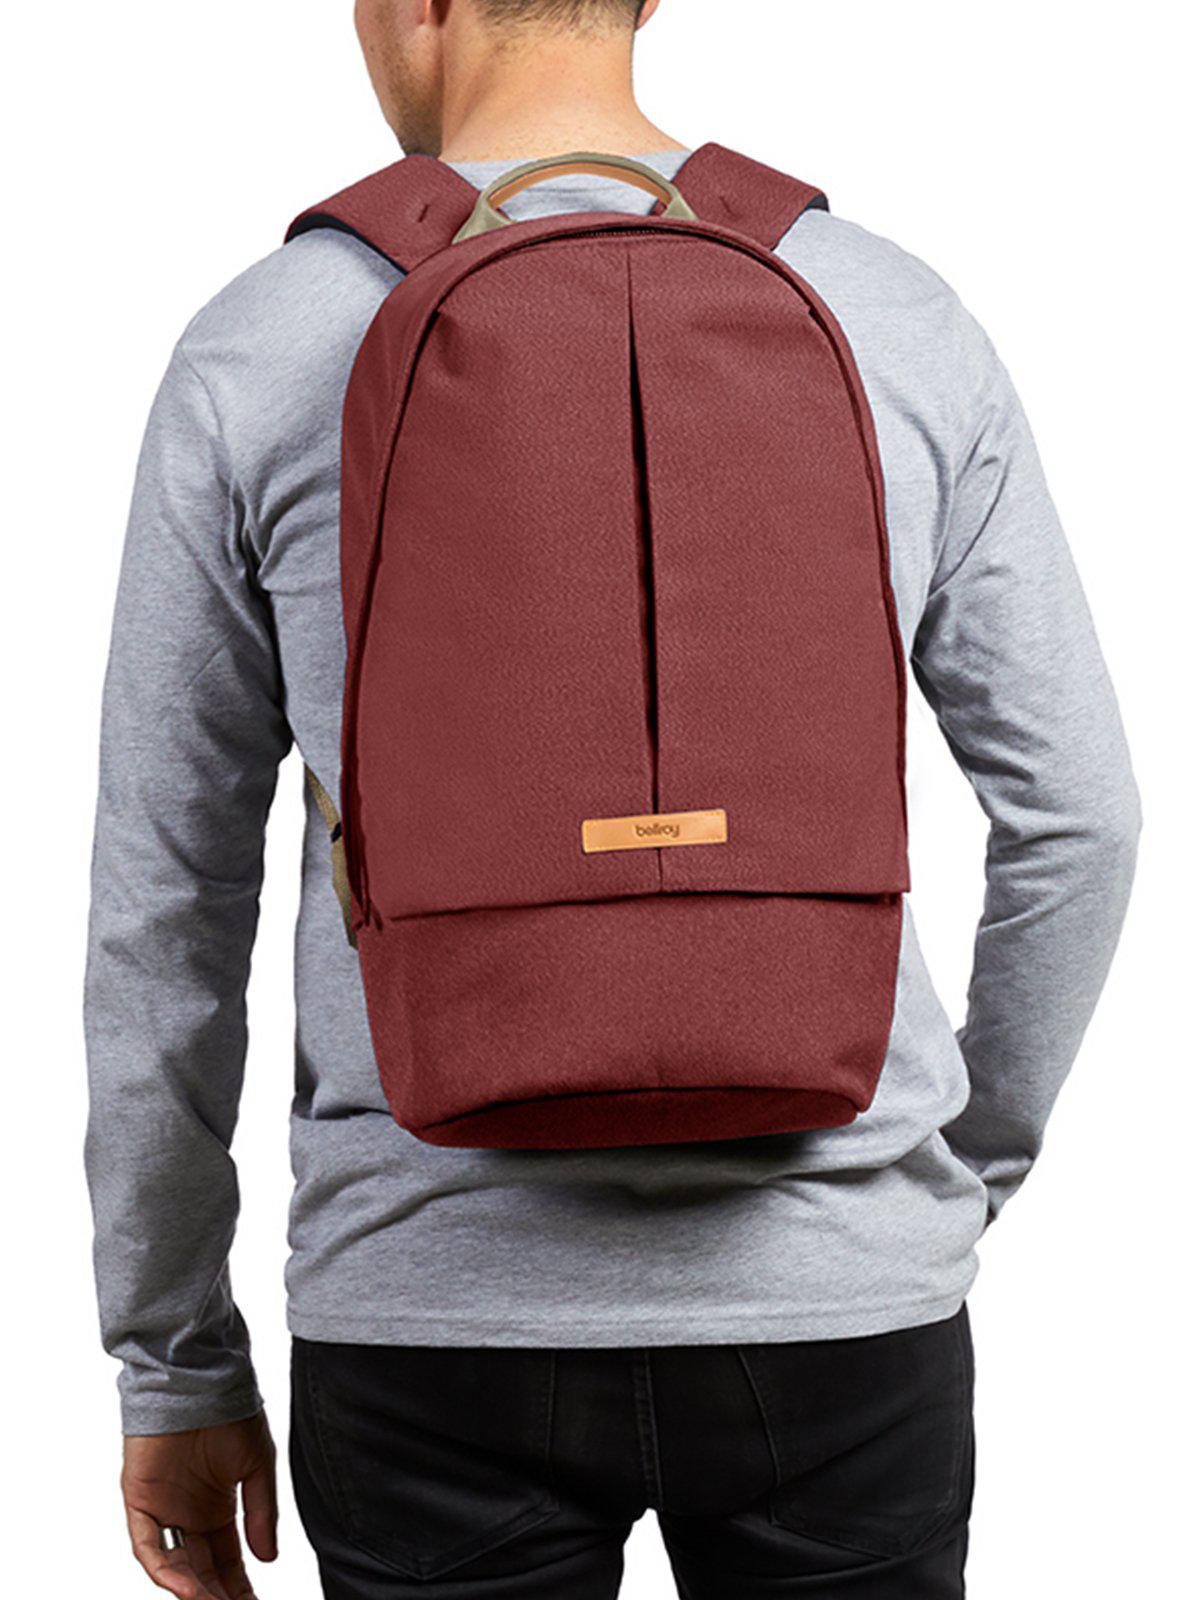 Bellroy Classic Backpack Plus Red Earth